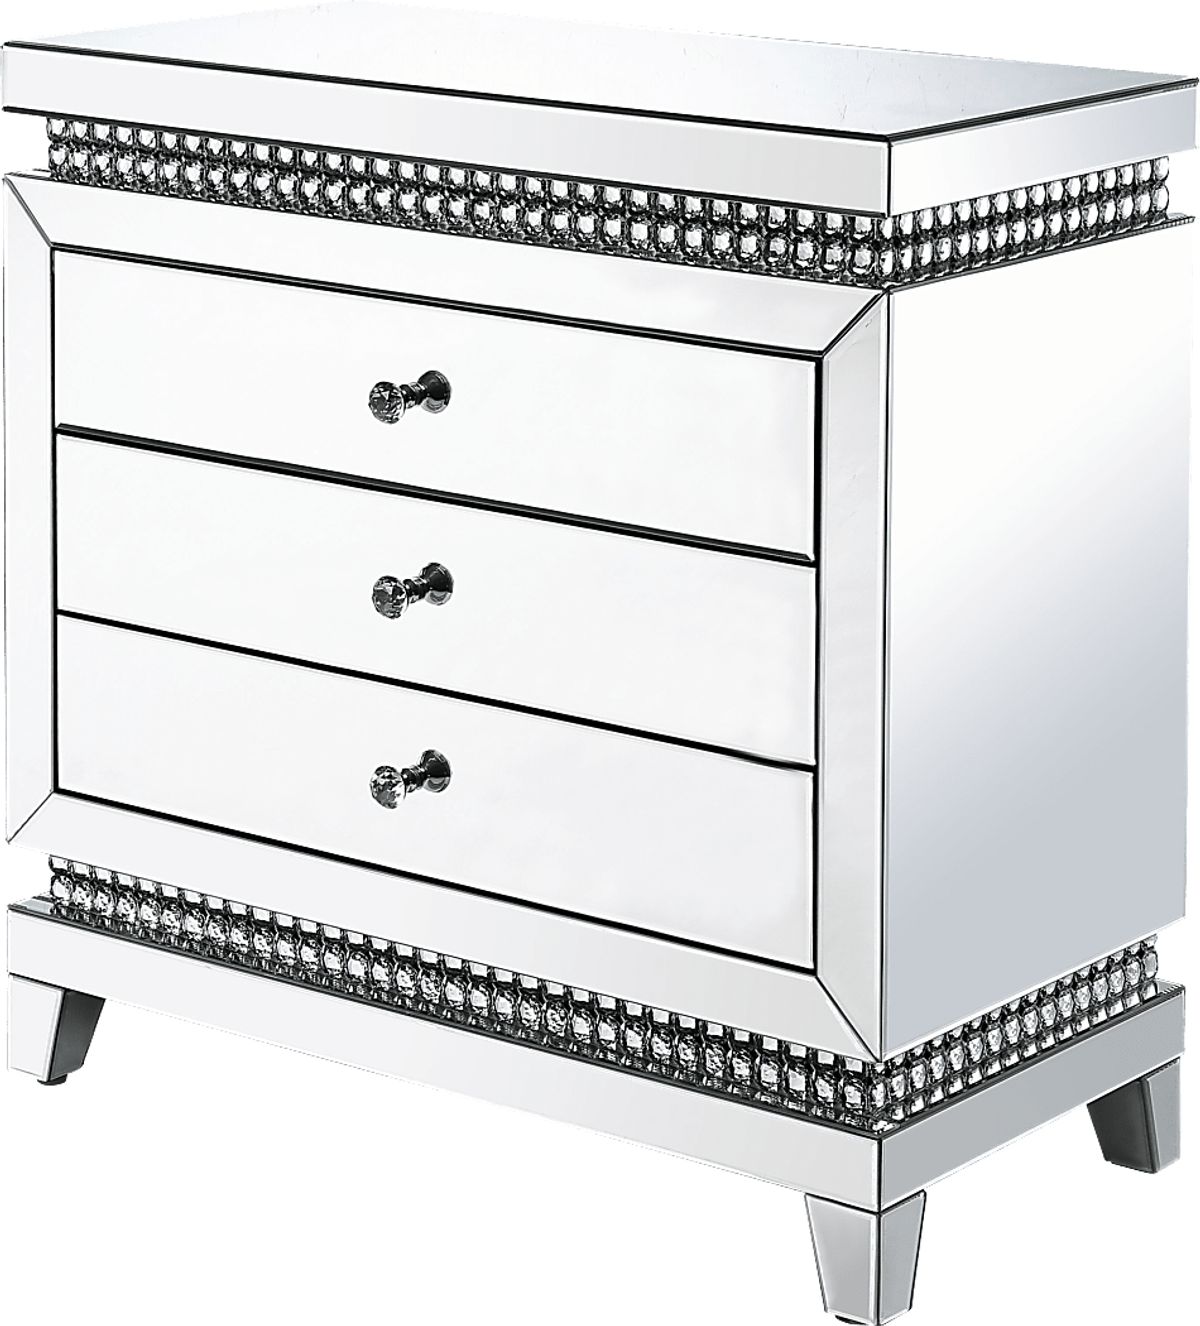 Bradbe Silver Accent Cabinet 21297812 Image Item?cache Id=10a118285ae185be7f8d66c56b19b908&w=1200